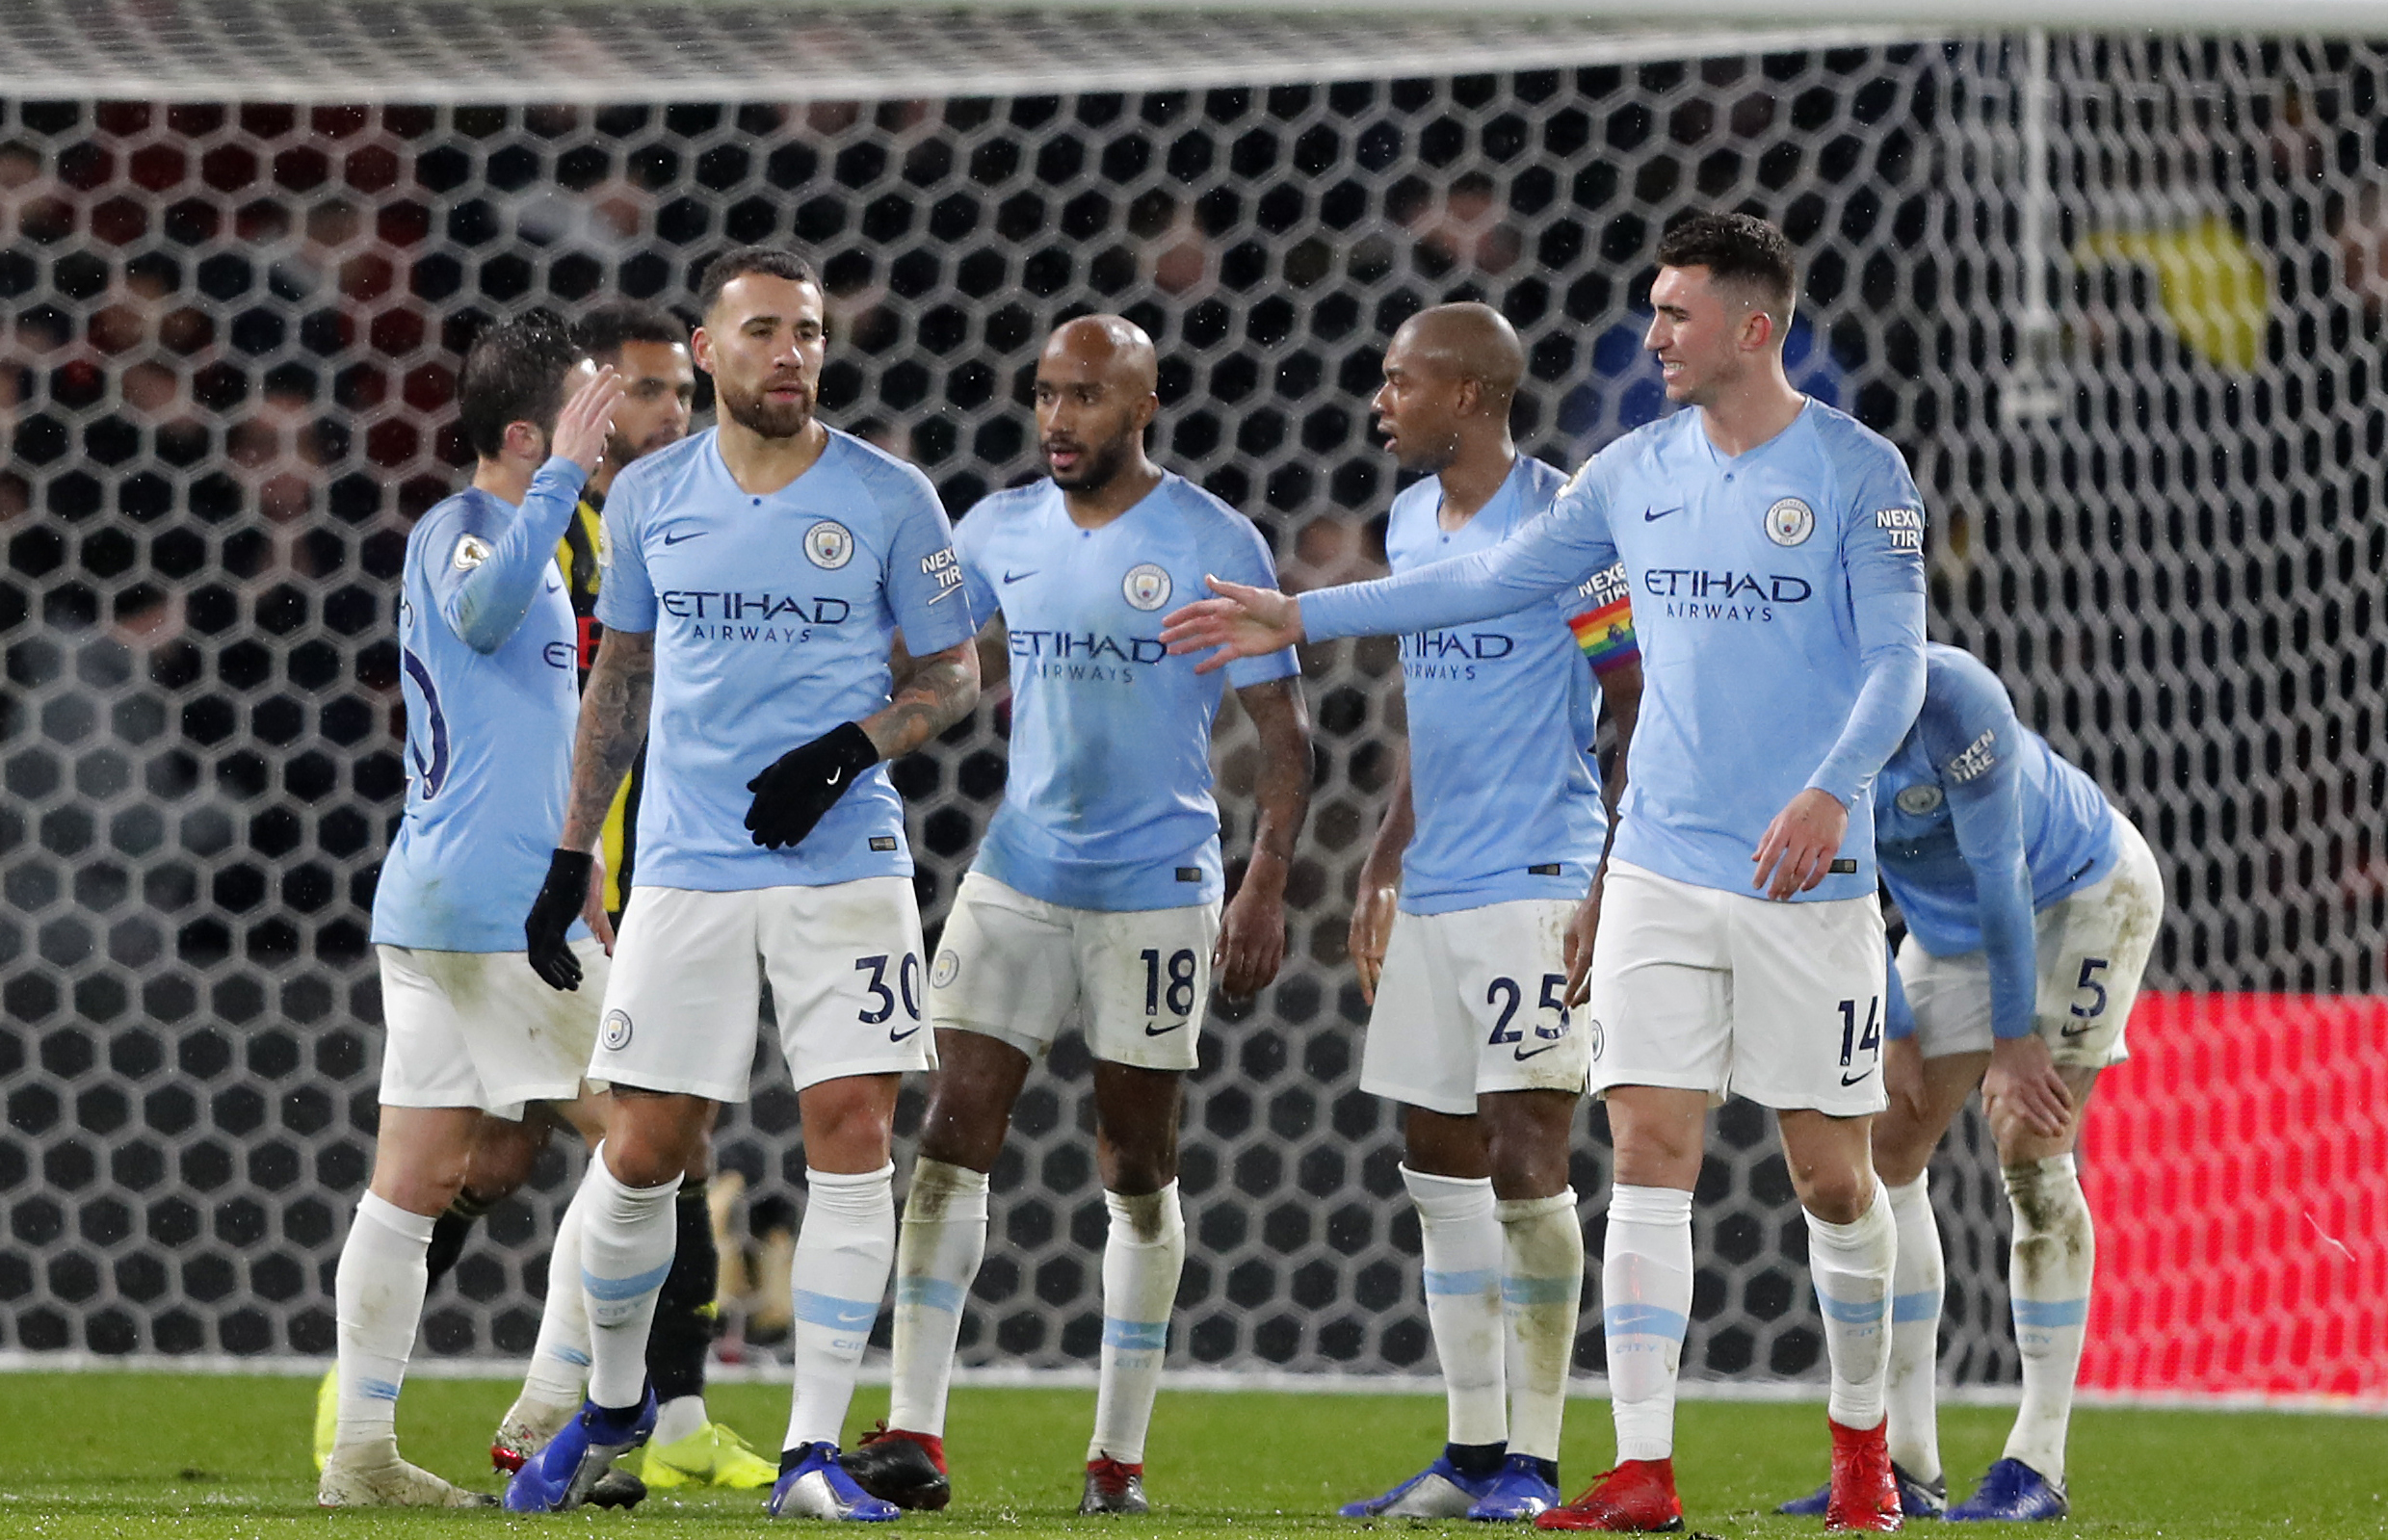 Man City beats Watford 2-1, moves 5 points clear in EPL